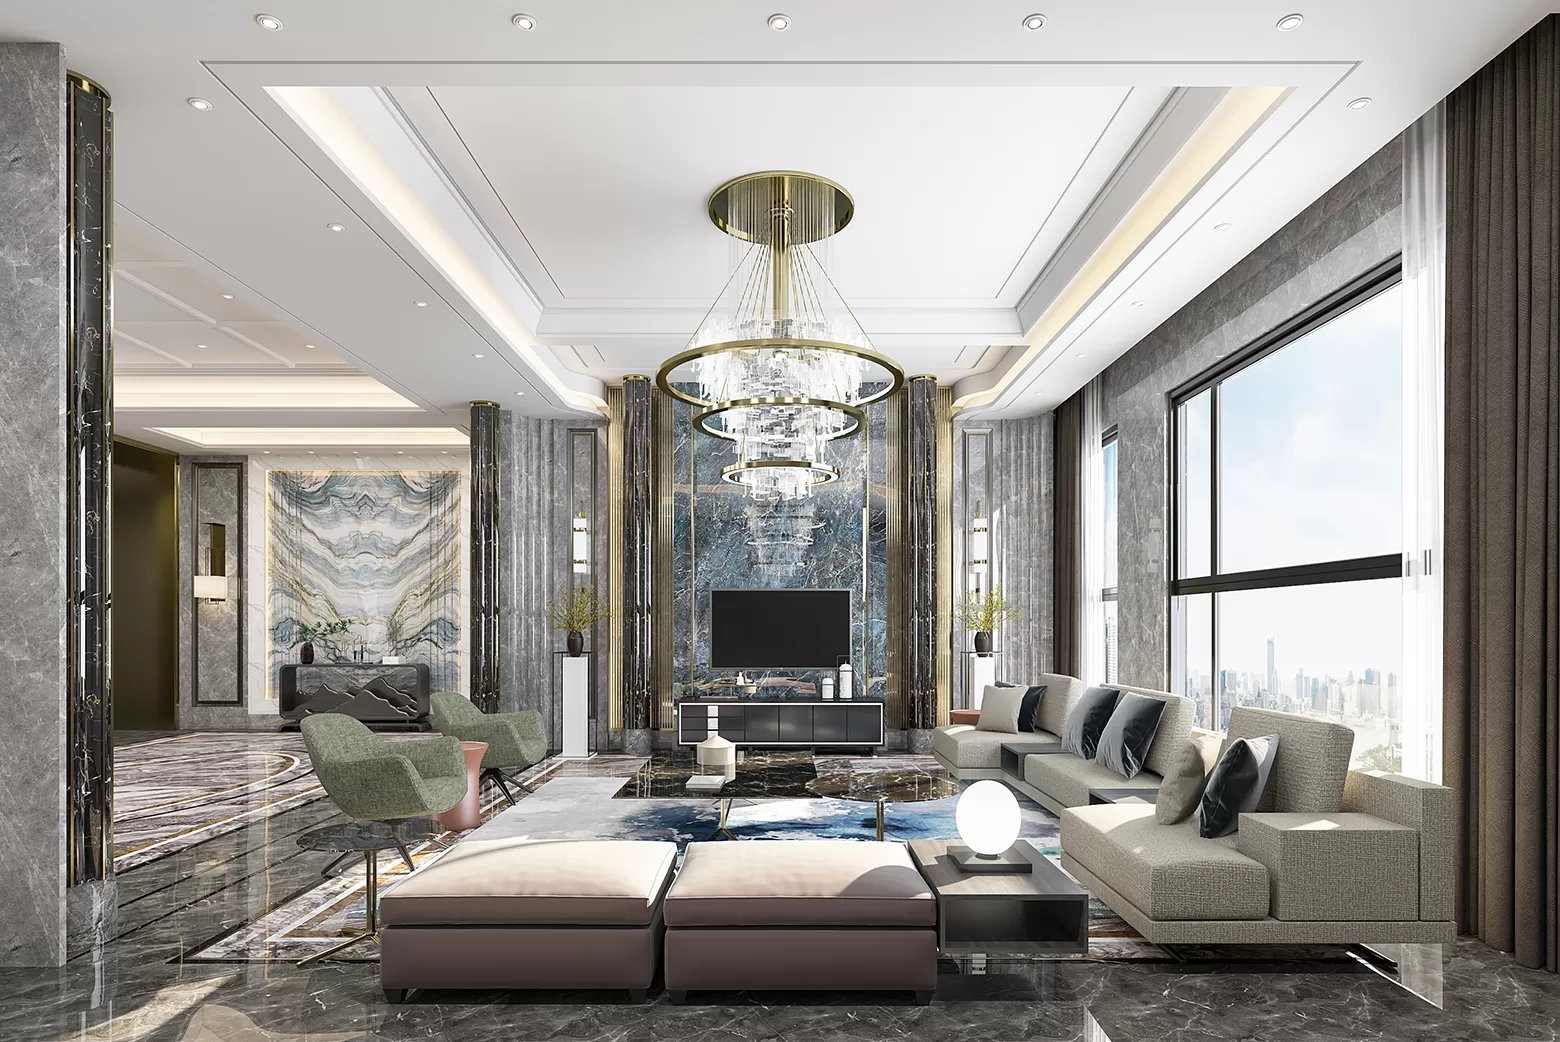 DESMOD INTERIOR 2021 (VRAY) – 4. LIVING ROOM – CHINESE – 108